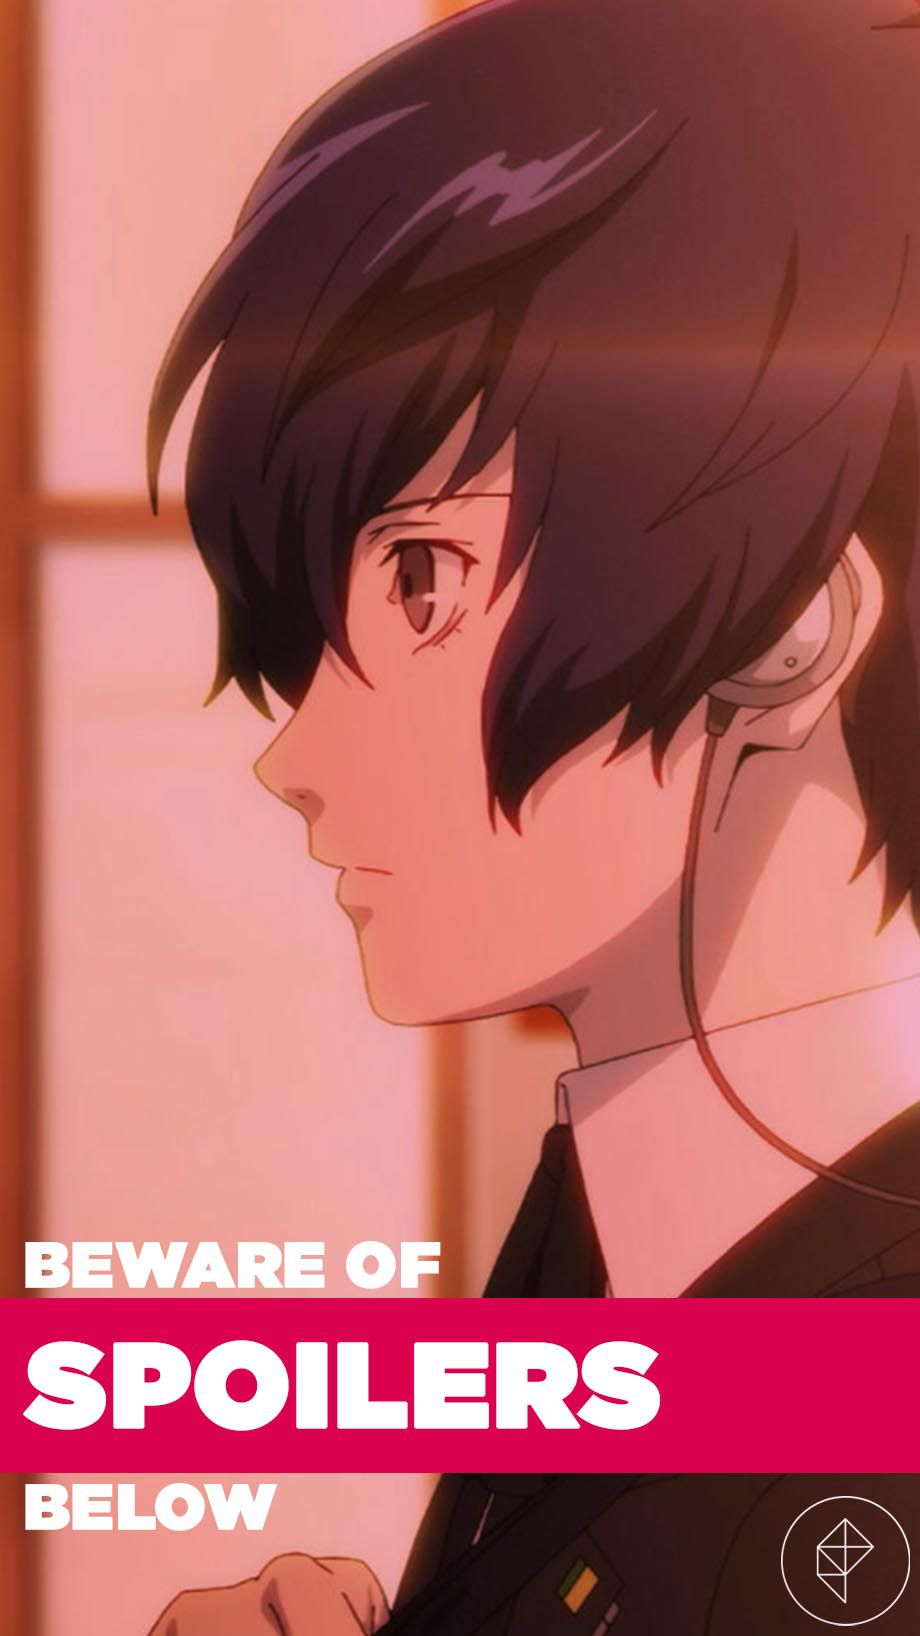 A spoiler warning for Persona 3 Reload warns people not to scroll any further if they don’t want to know how to get the good ending in P3R.